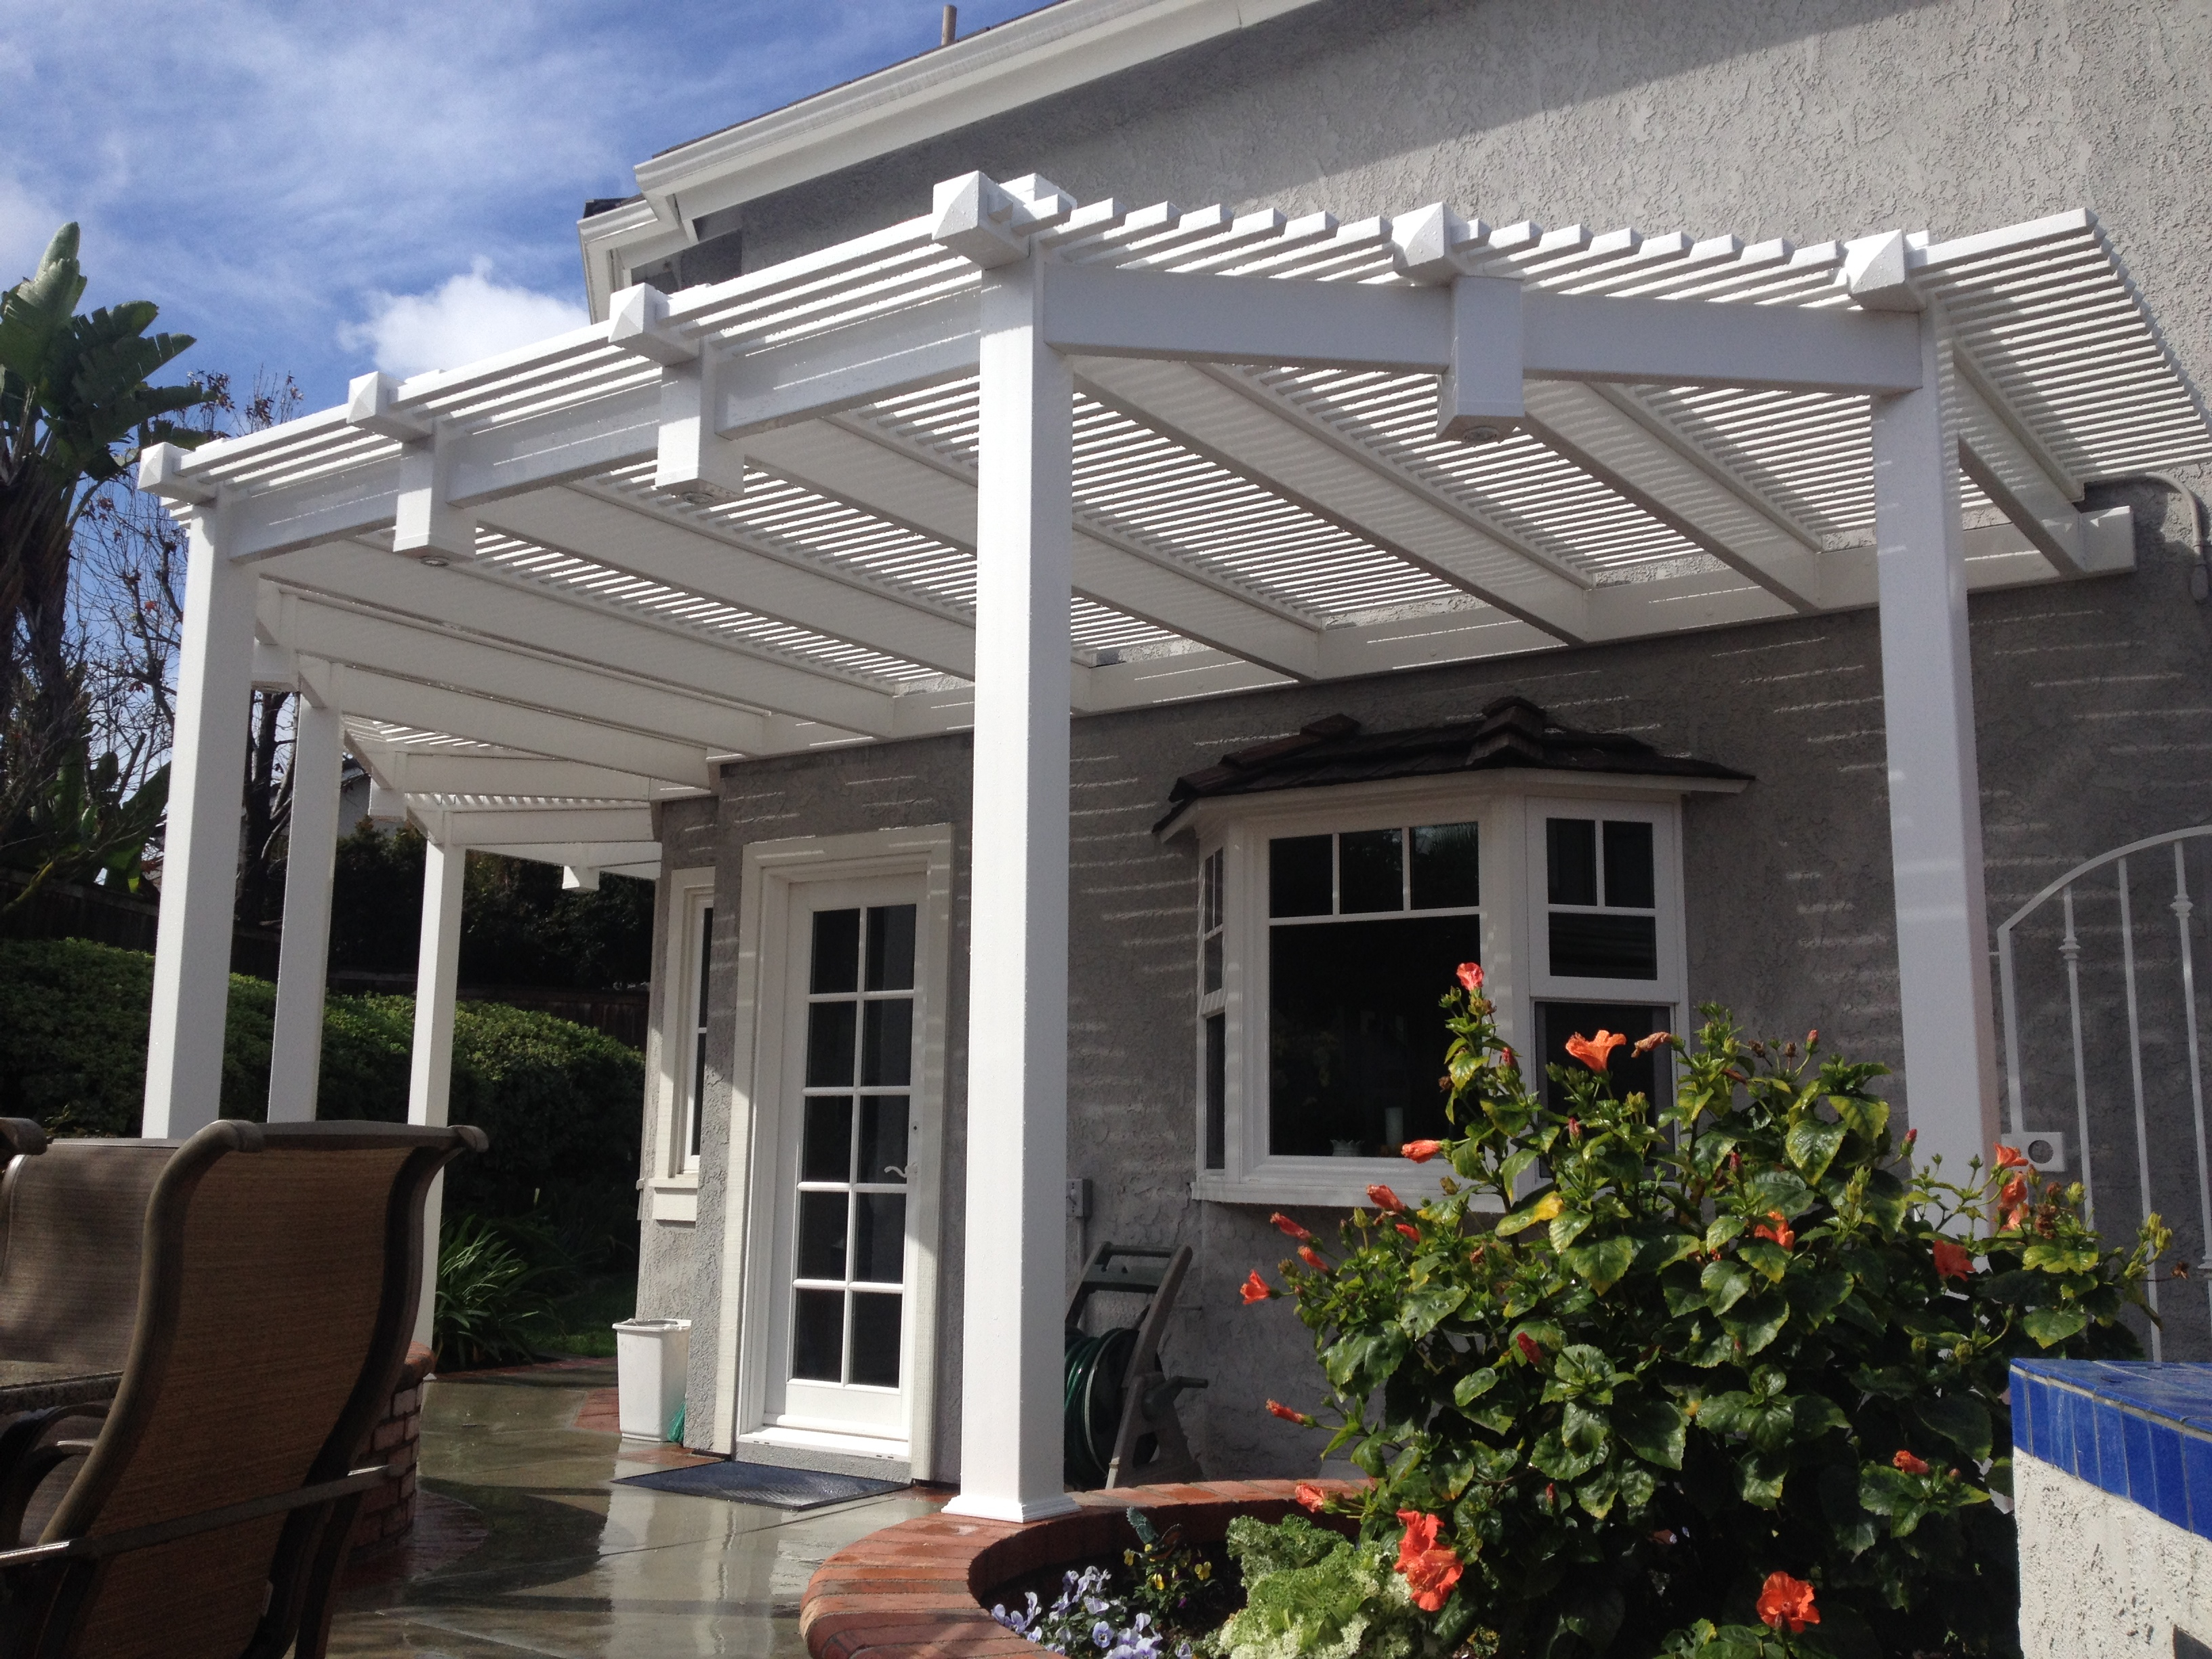 Vinyl Patio Covers Bakersfield Thediapercake Home Trend regarding proportions 3264 X 2448